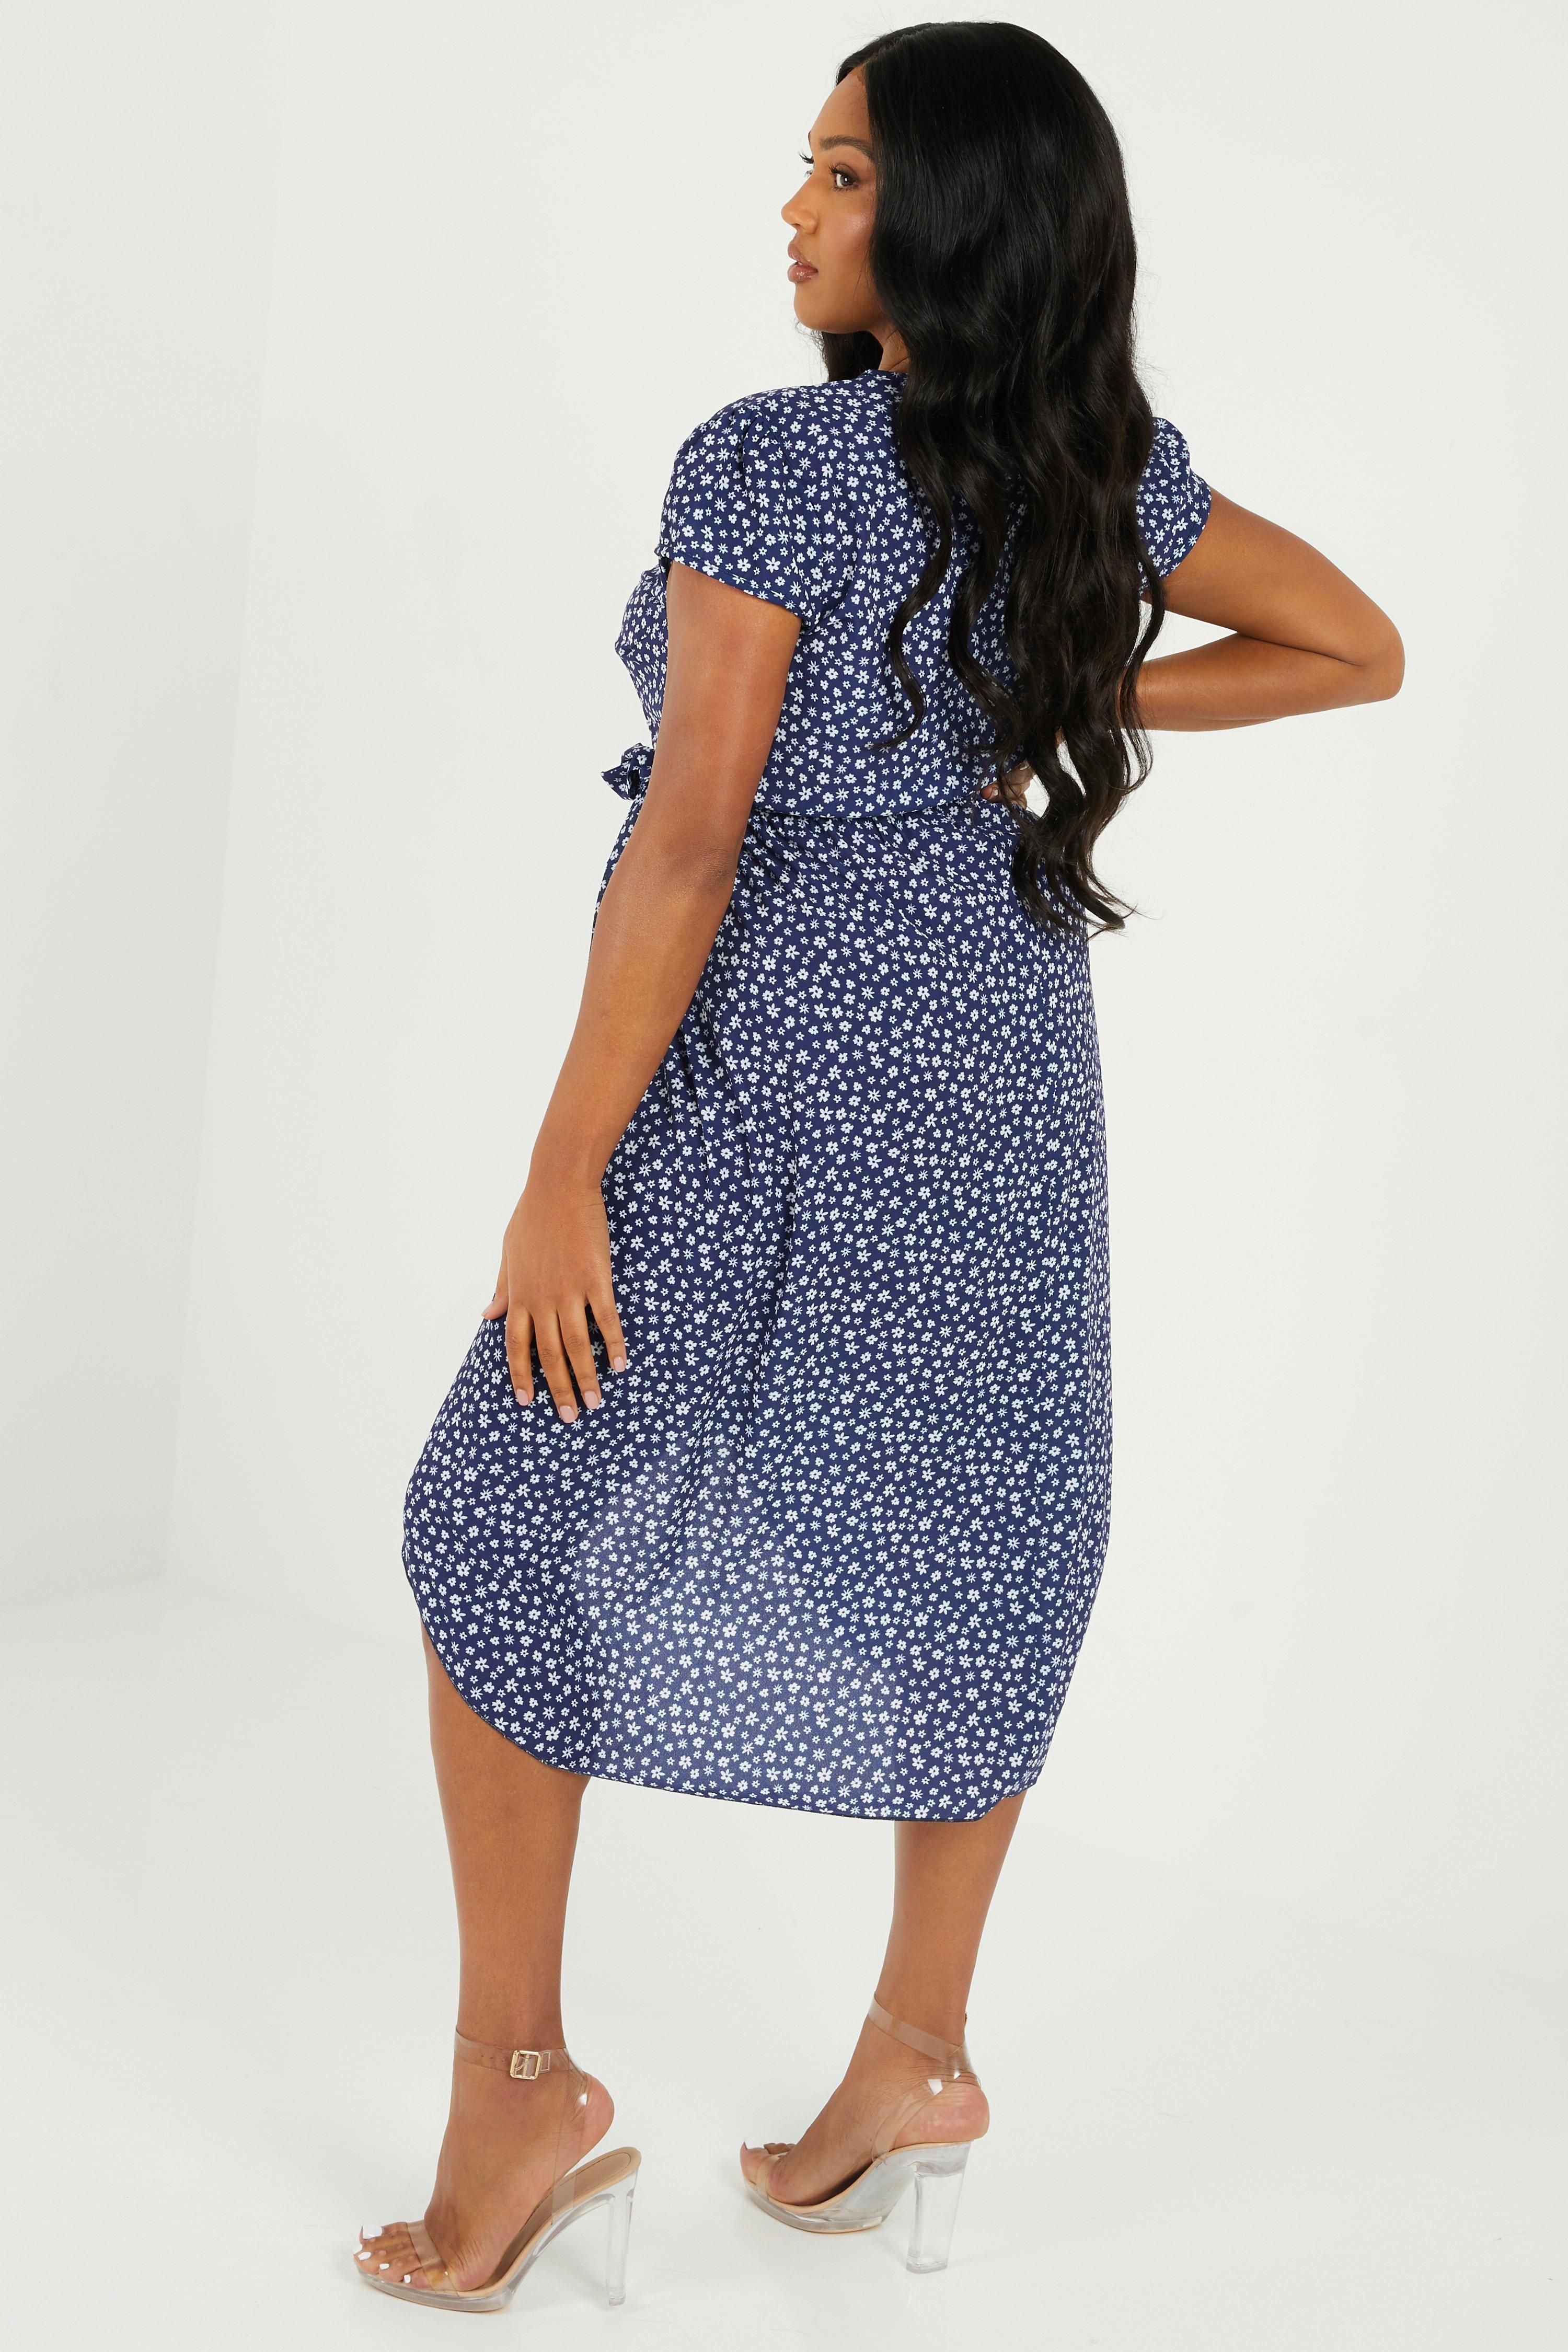 - Curve collection  - Ditsy floral print  - V neckline  - Wrap style  - Midi length   - Length: 125cm approx